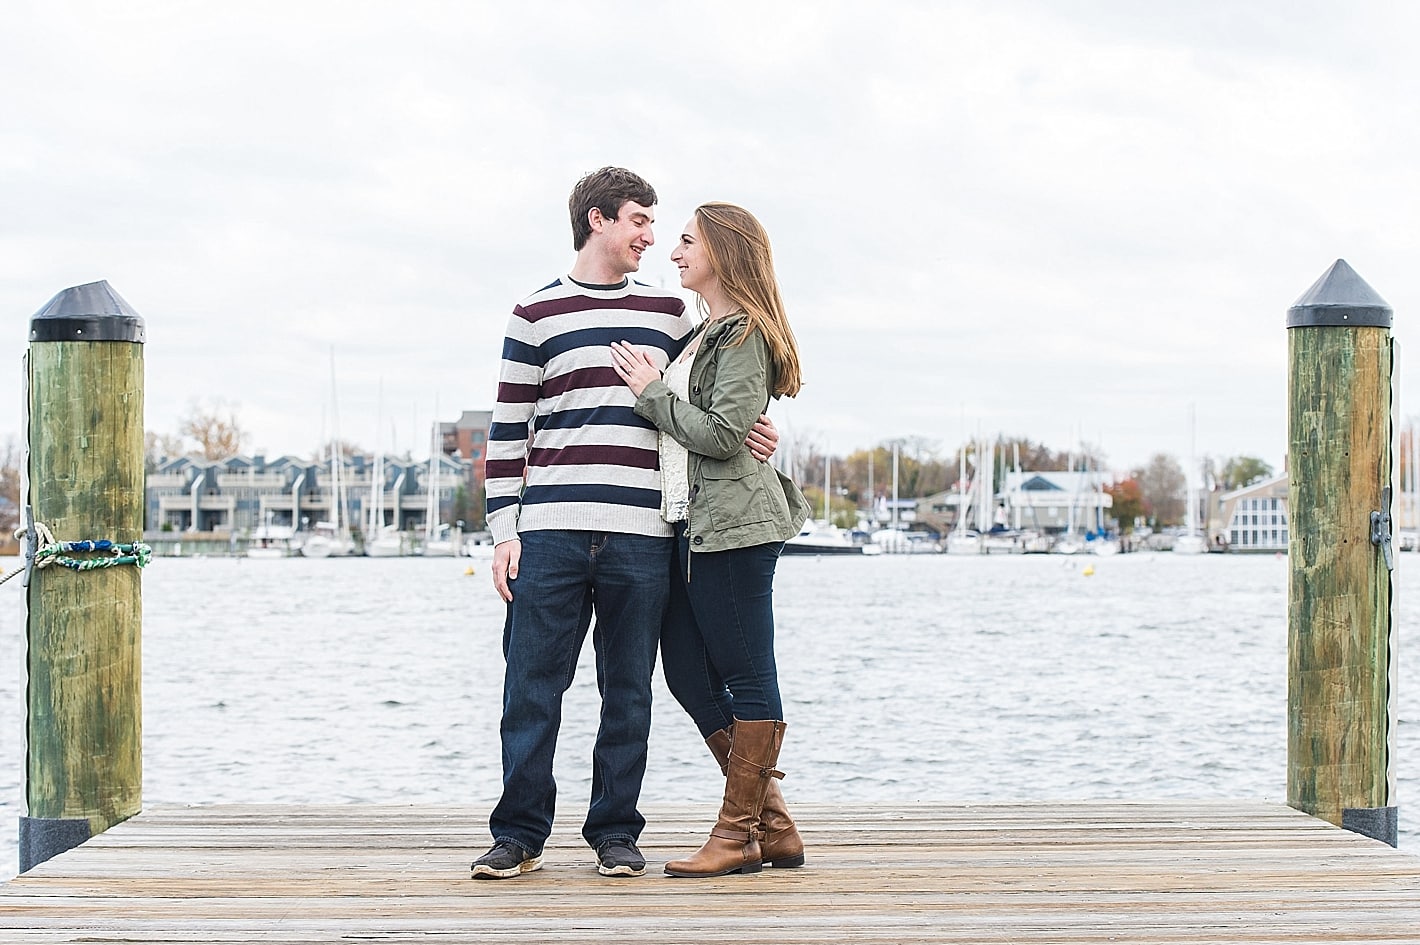 Downtown Annapolis Maryland Engagement Photos